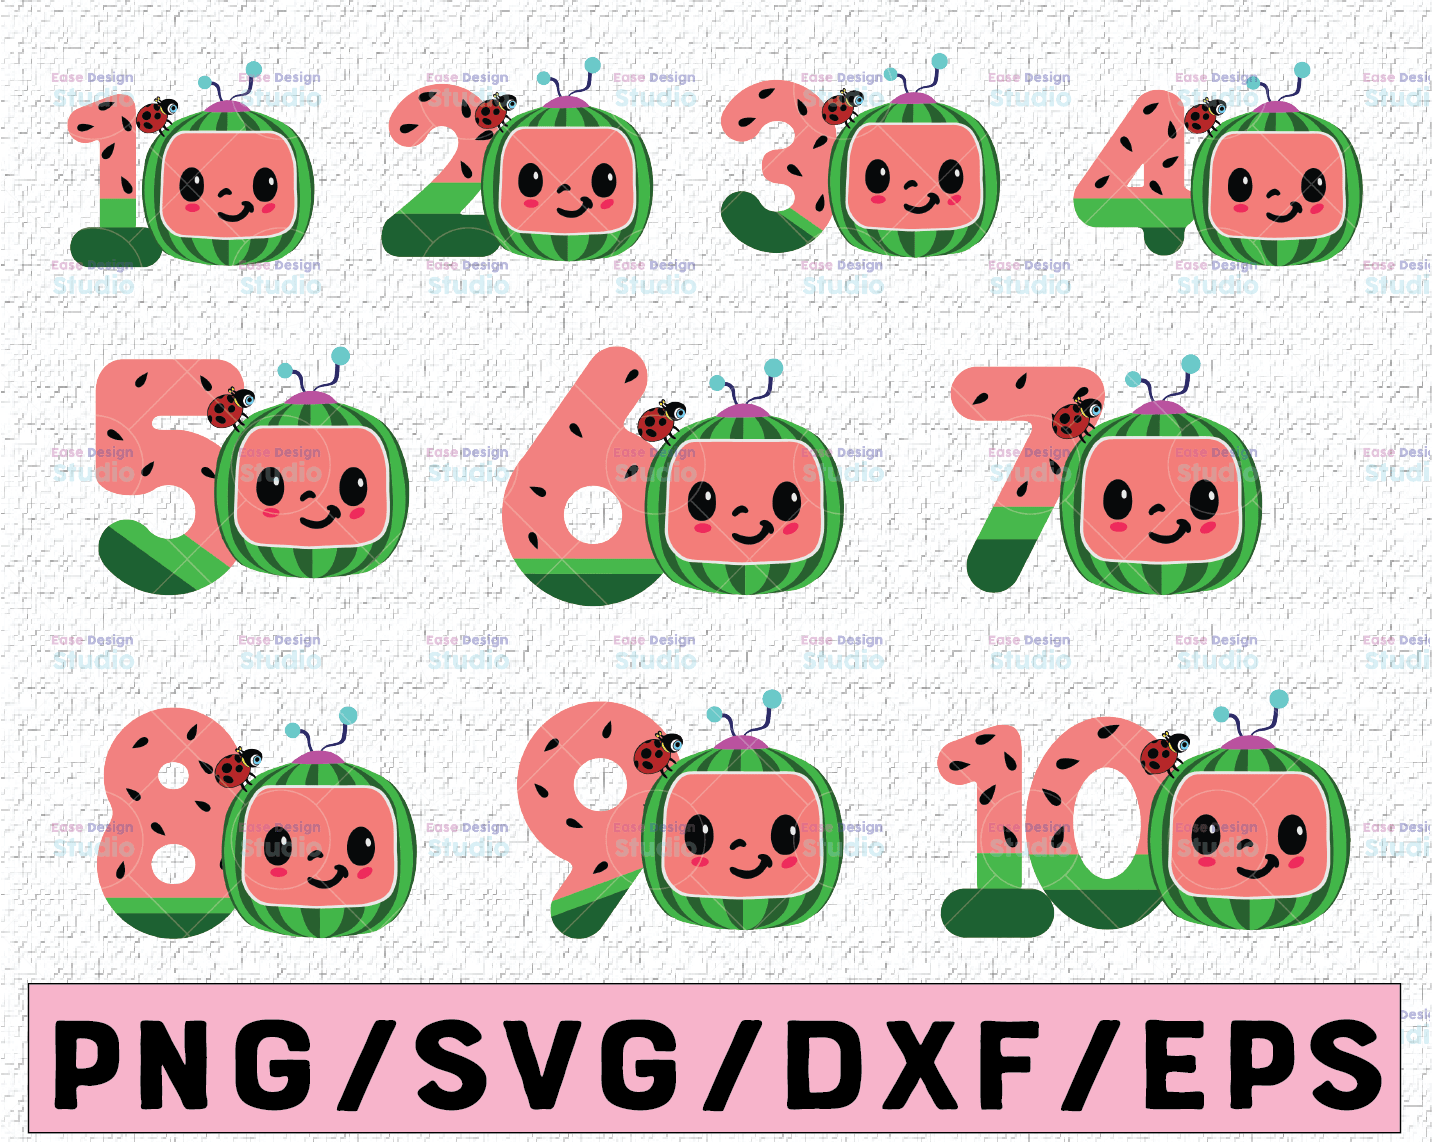 Cocomelon Logo And Birthday Number Svg Png Cocomelon Birthday Svg Png Cocomelon Family Birthday Png Watermelon Svg Png Eps Jpg Dxf Vectorency